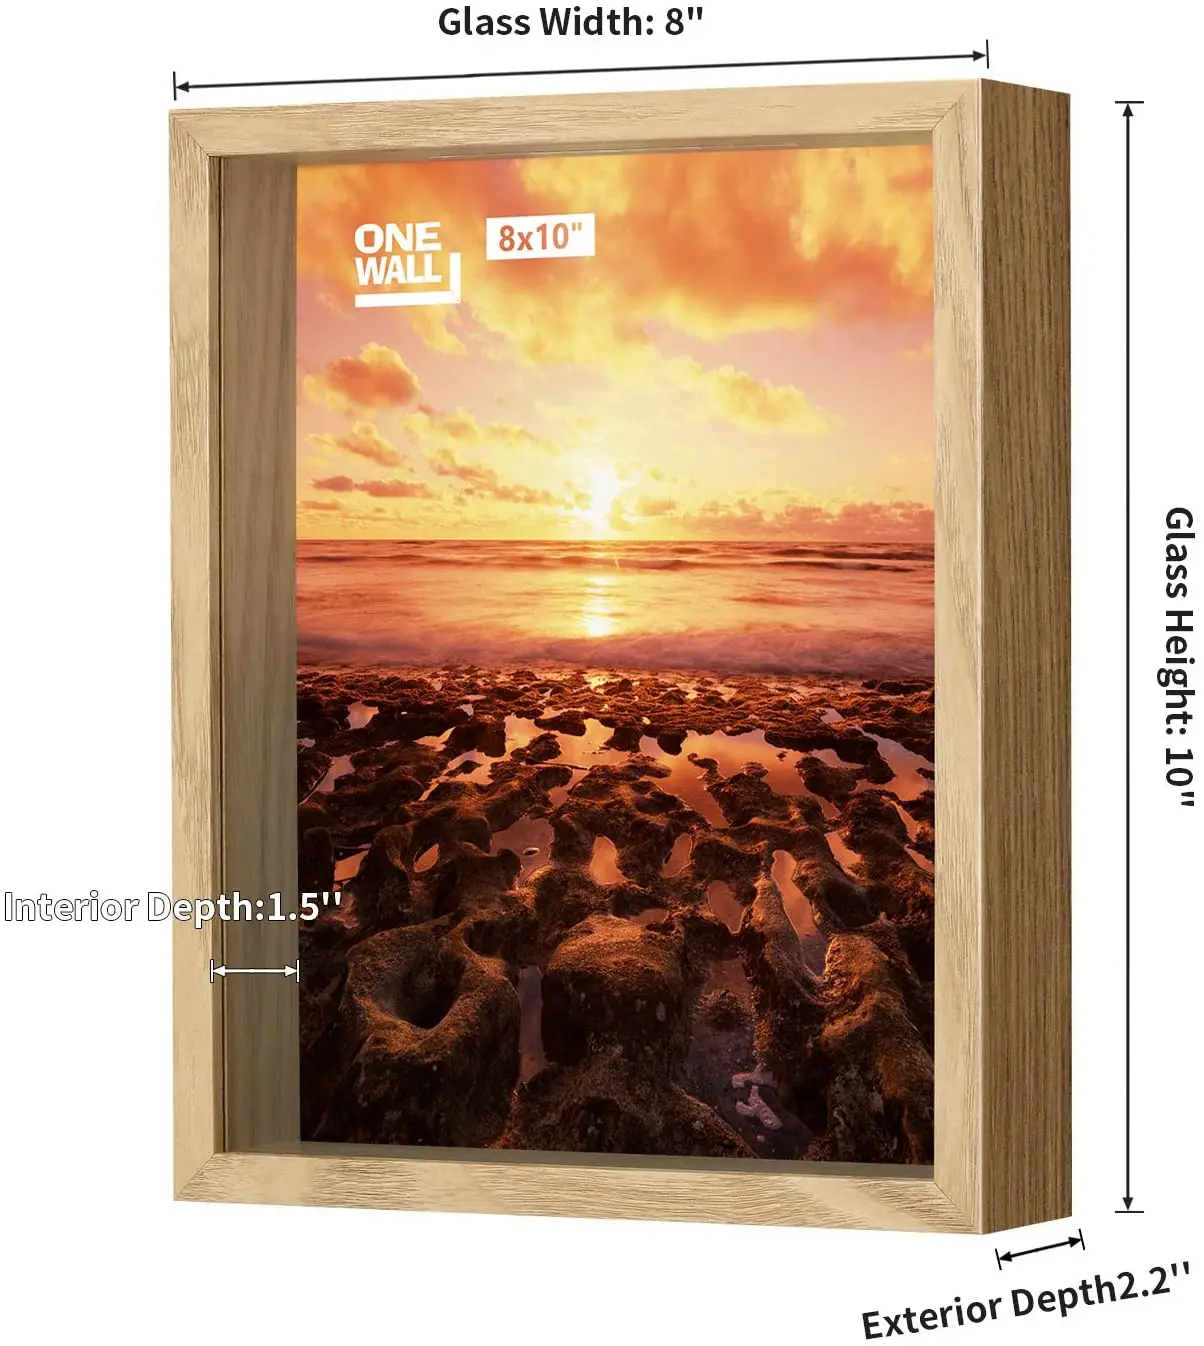 ONE WALL 10x8 inch Deep Ticket Memory Shadow Box Frame Wooden Display Box with Slot Top Loading for Crafts for Wall and Tabletop